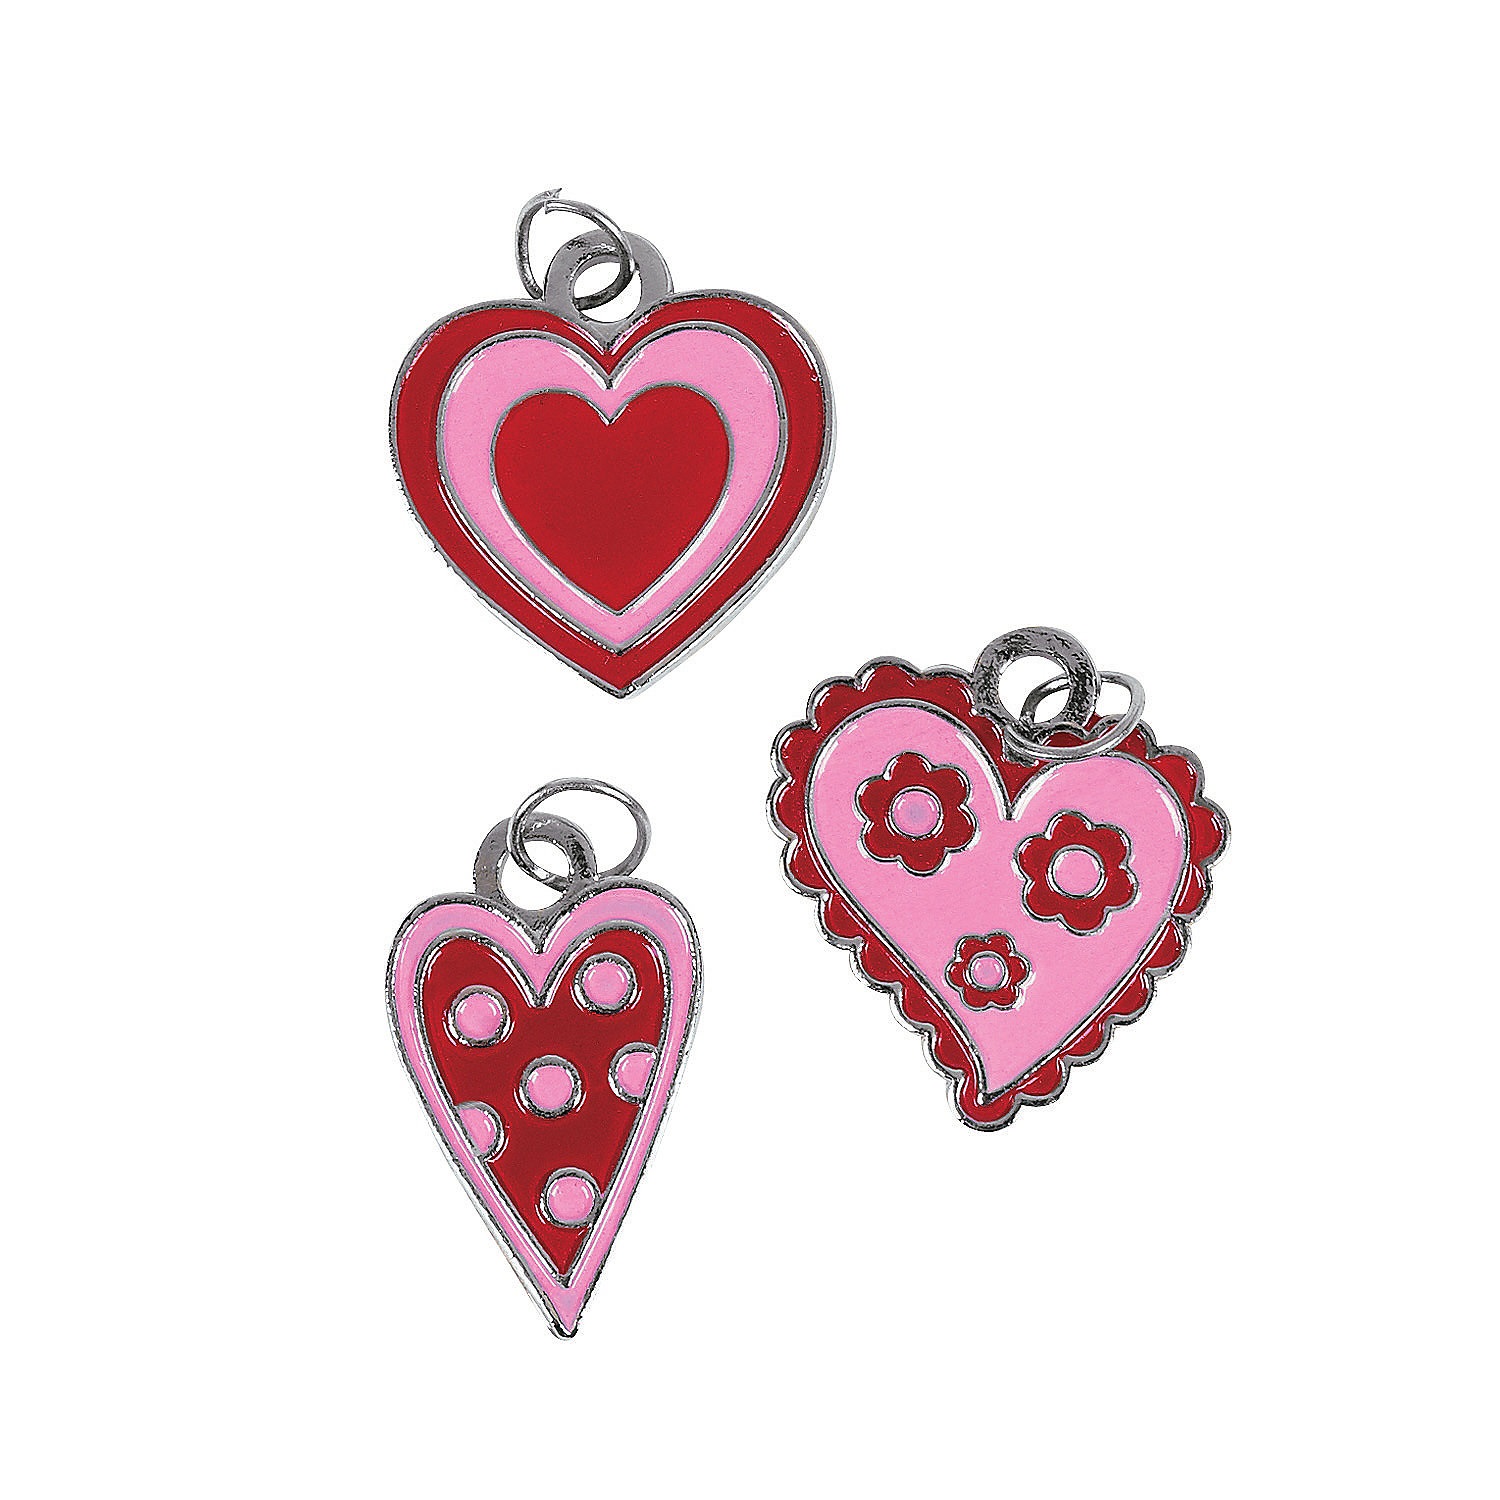 red-and-pink-enamel-heart-charms-24-pc-_68_45690